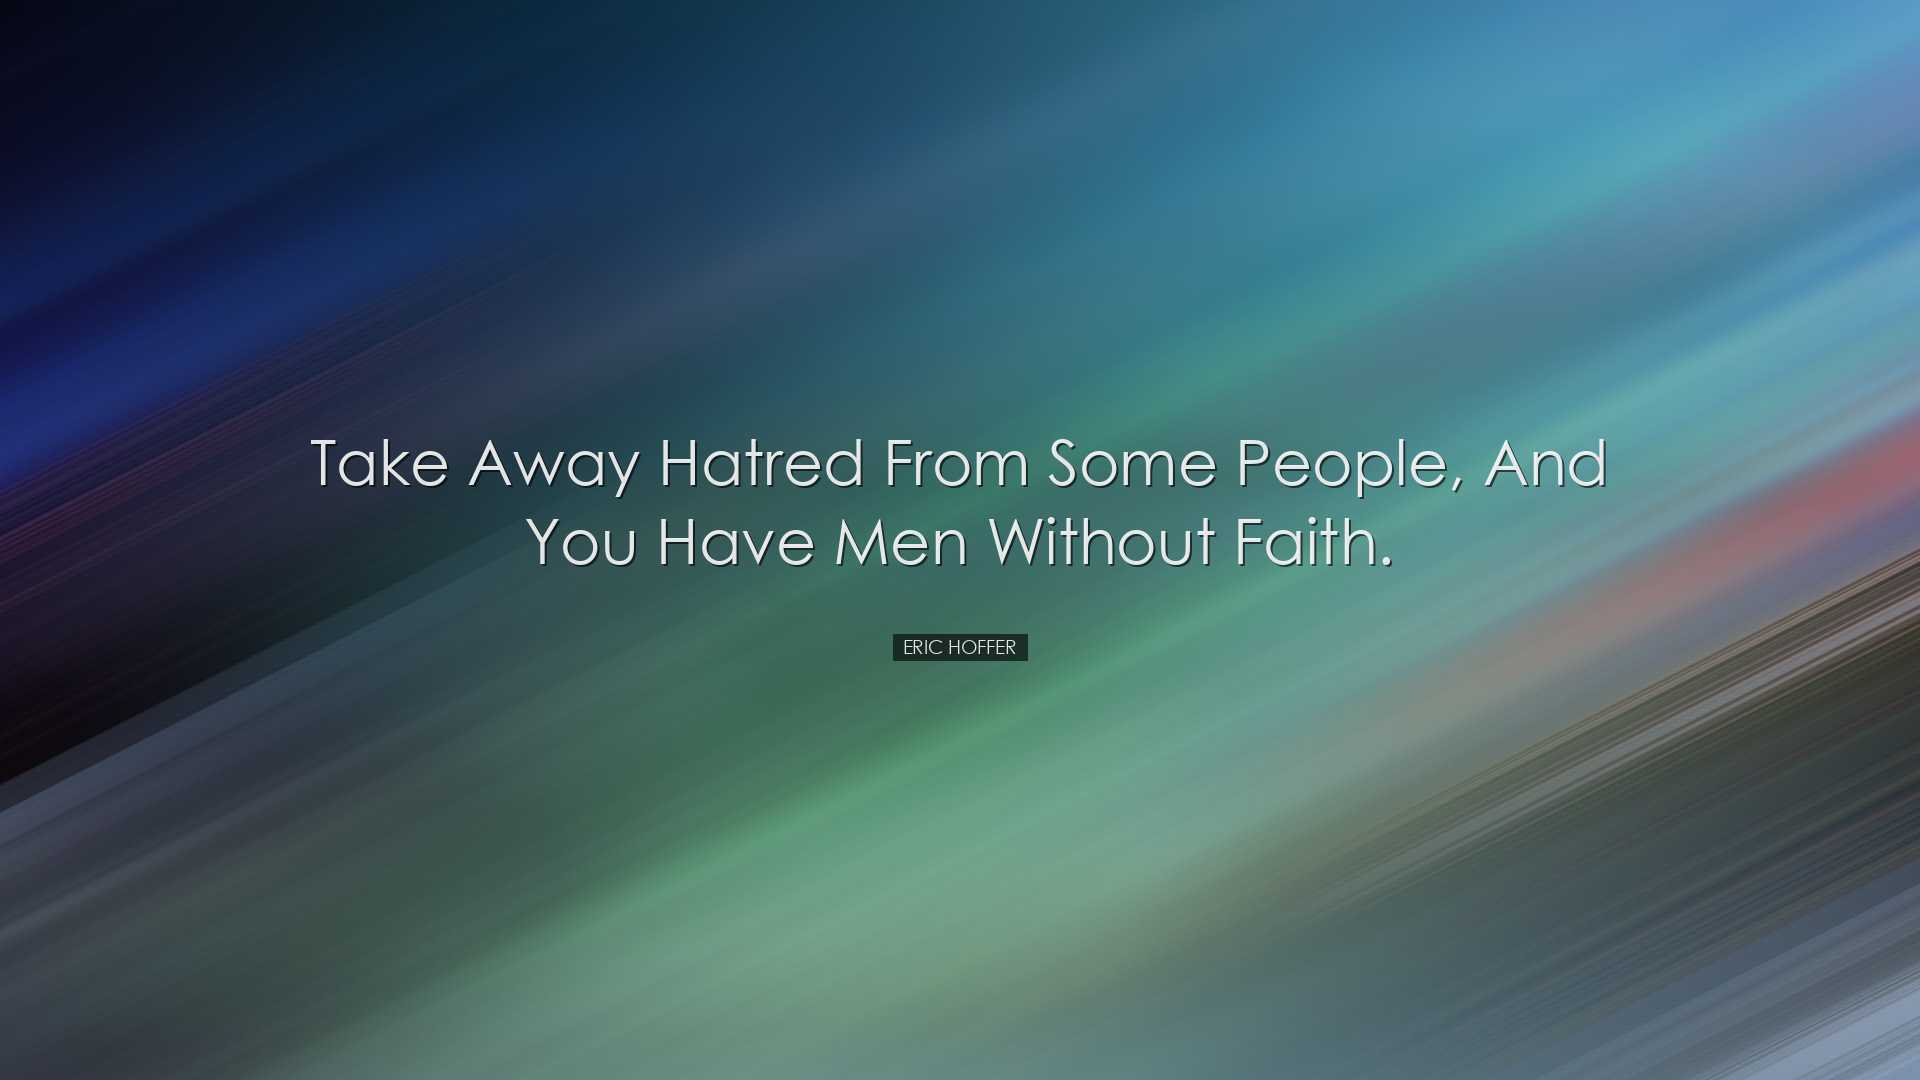 Take away hatred from some people, and you have men without faith.